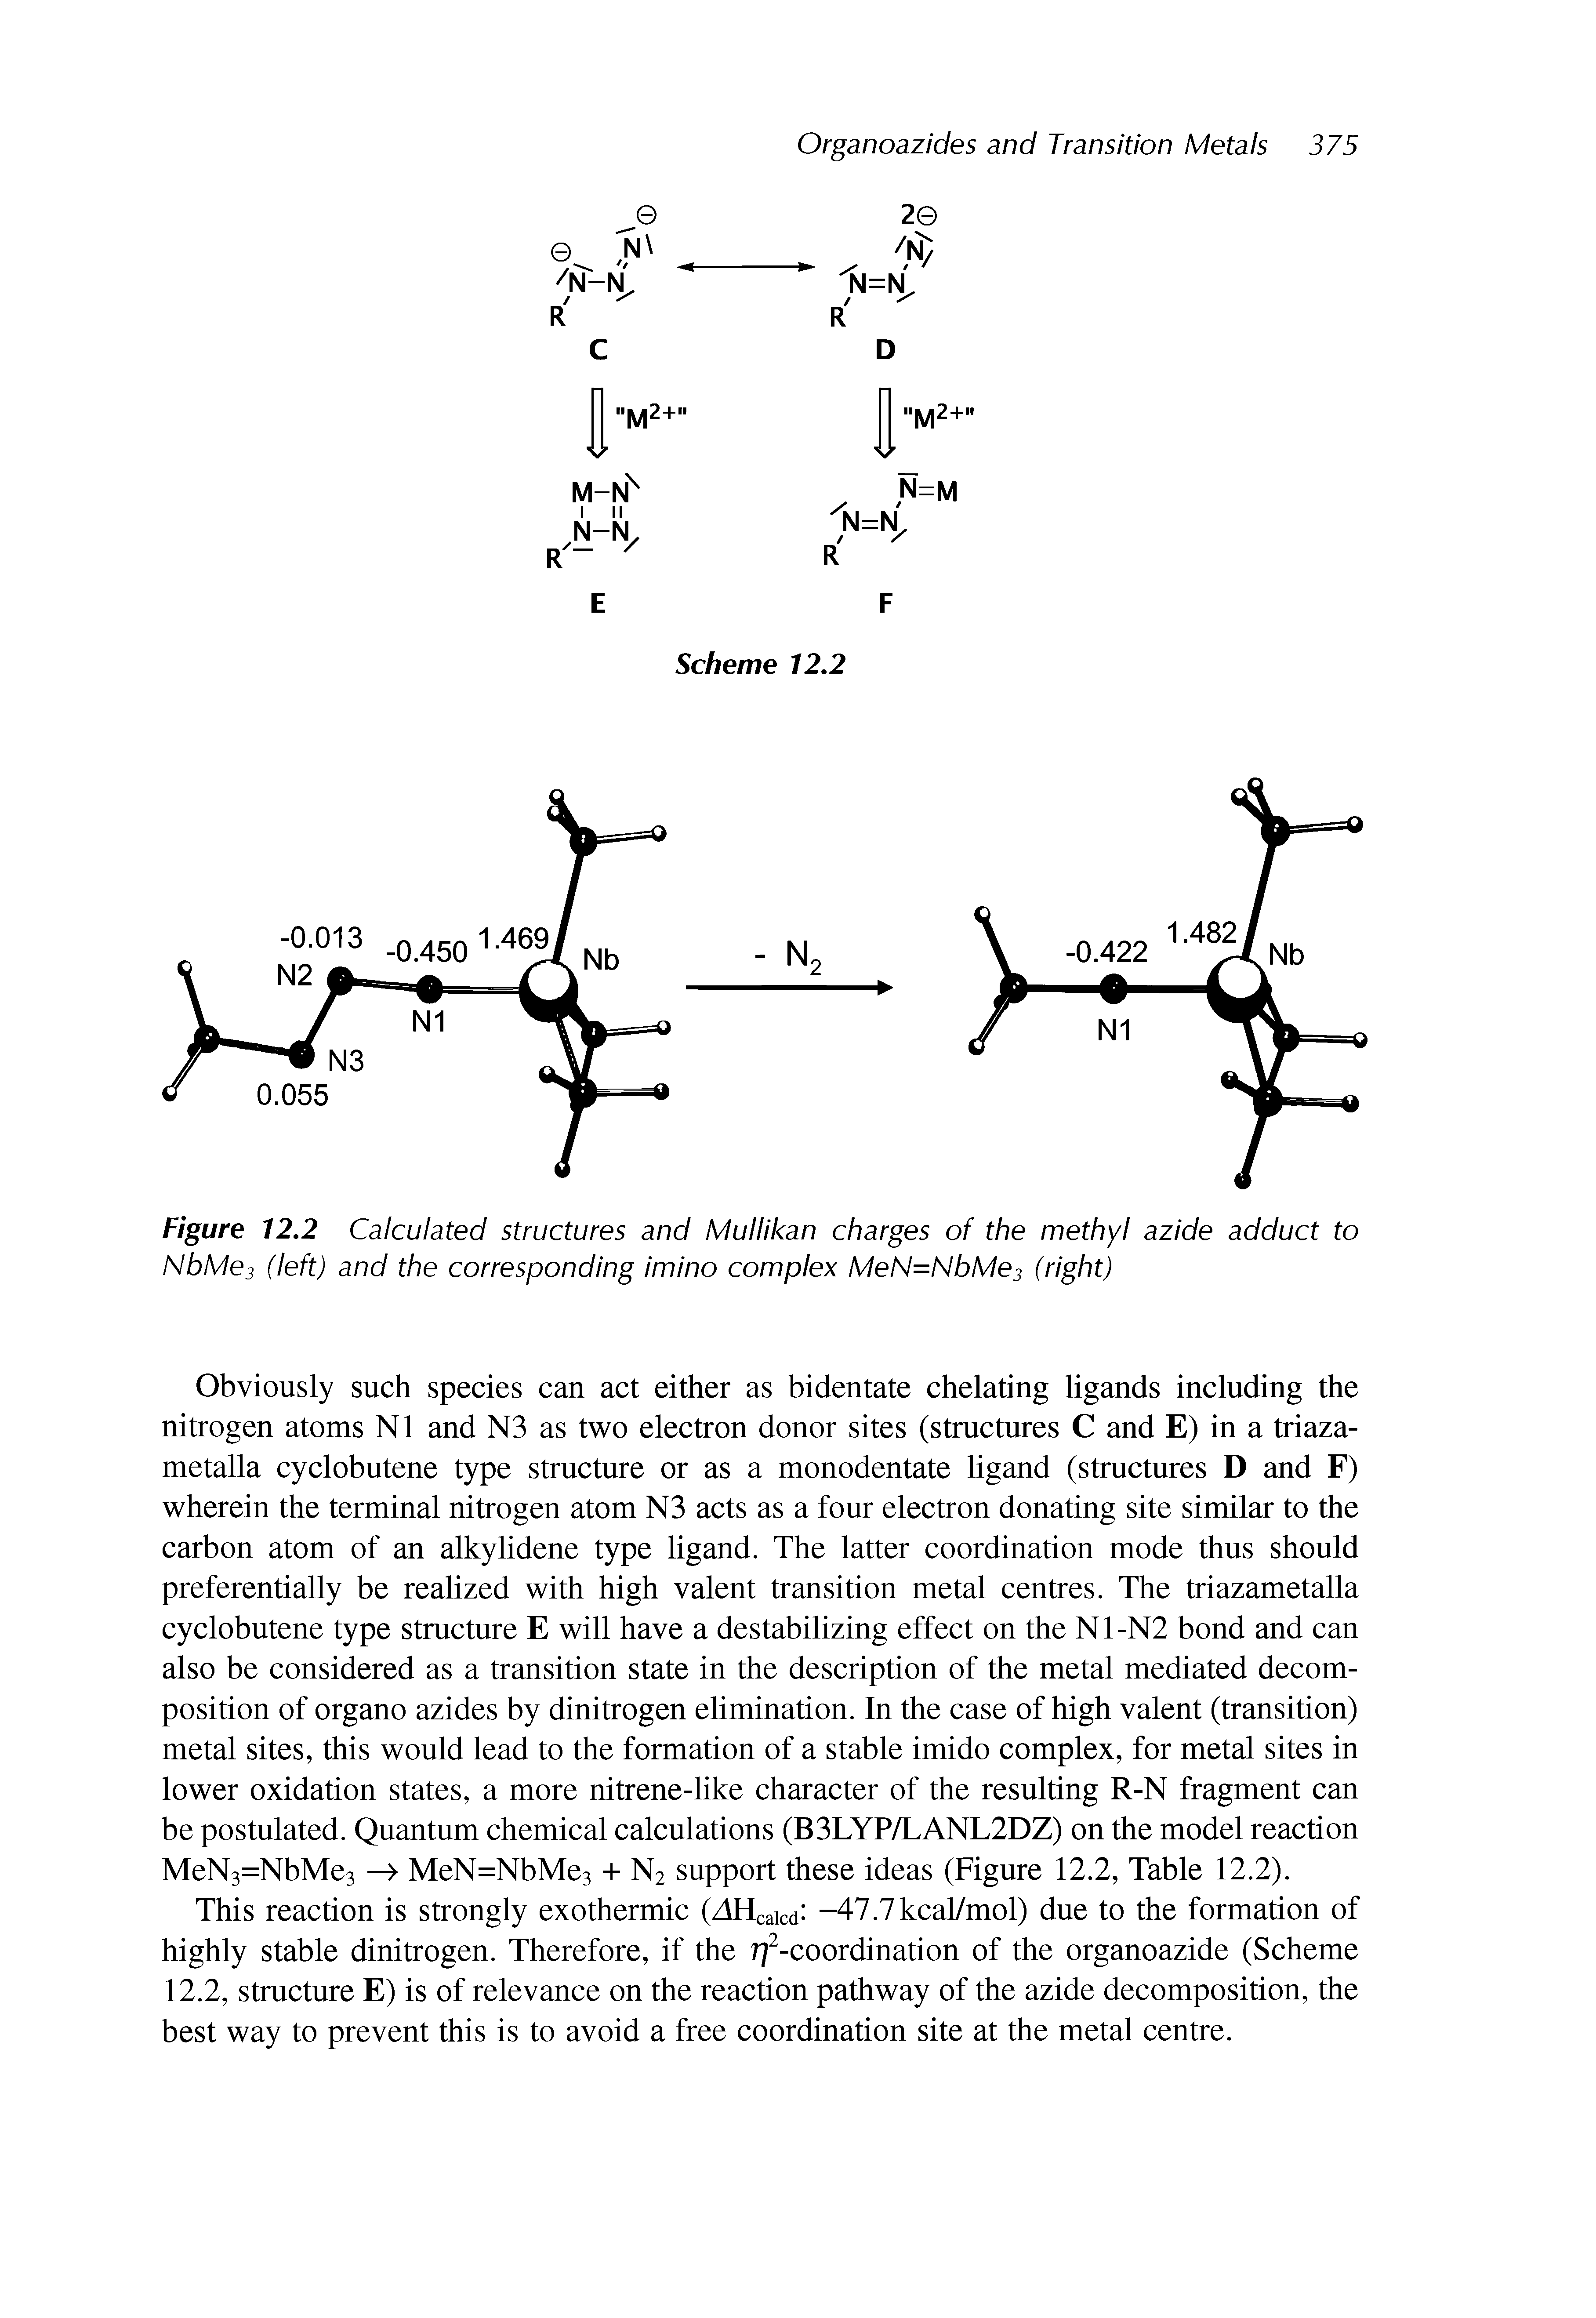 Figure 12.2 Calculated structures and Mullikan charges of the methyl azide adduct to NbMes (left) and the corresponding imino complex MeN=NbMe3 (right)...